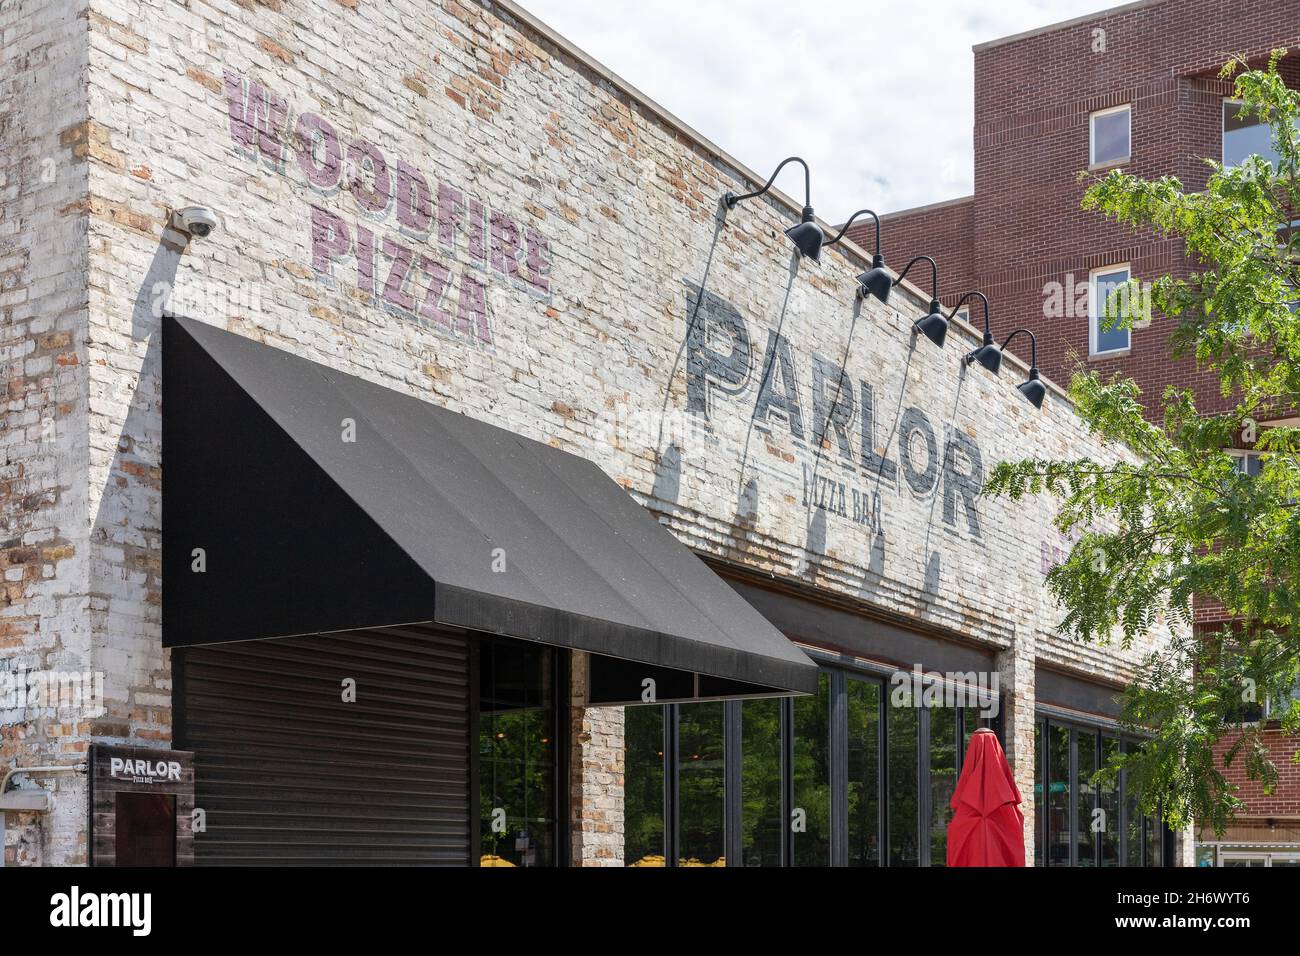 Parlor Pizza Bar is a local restaurant chain in Chicago with unique pizzas, craft beers, and a unique styled atmosphere. Stock Photo